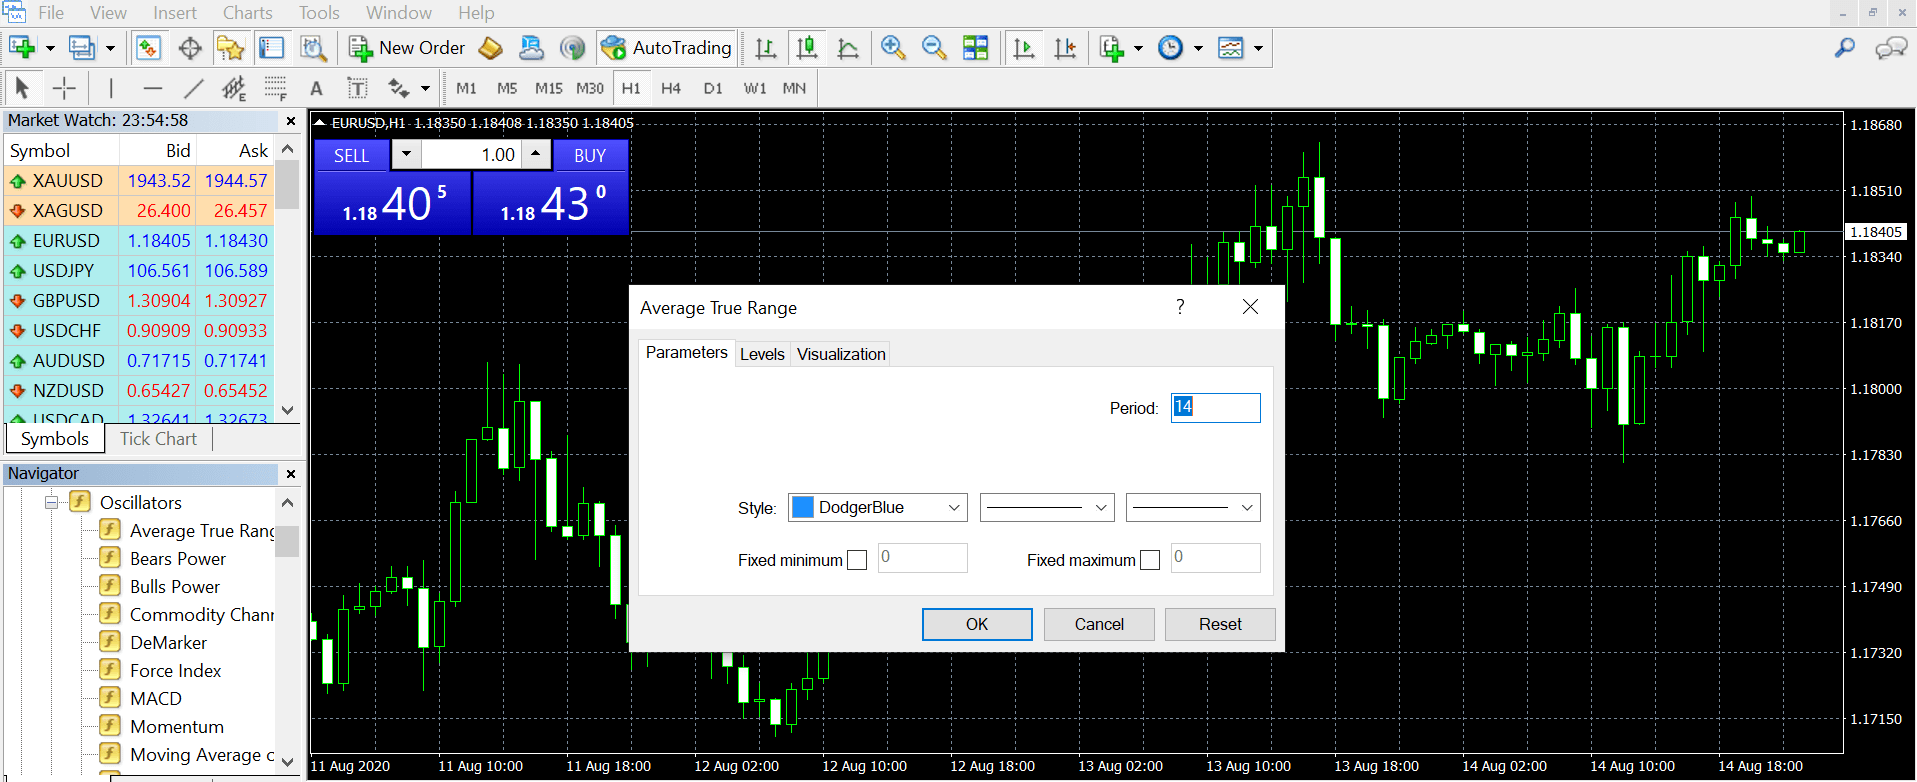 tradingplatforms-metatrader4-whatismt4-and-howtouseit-trading-indicator-dragged-ontomt4-image